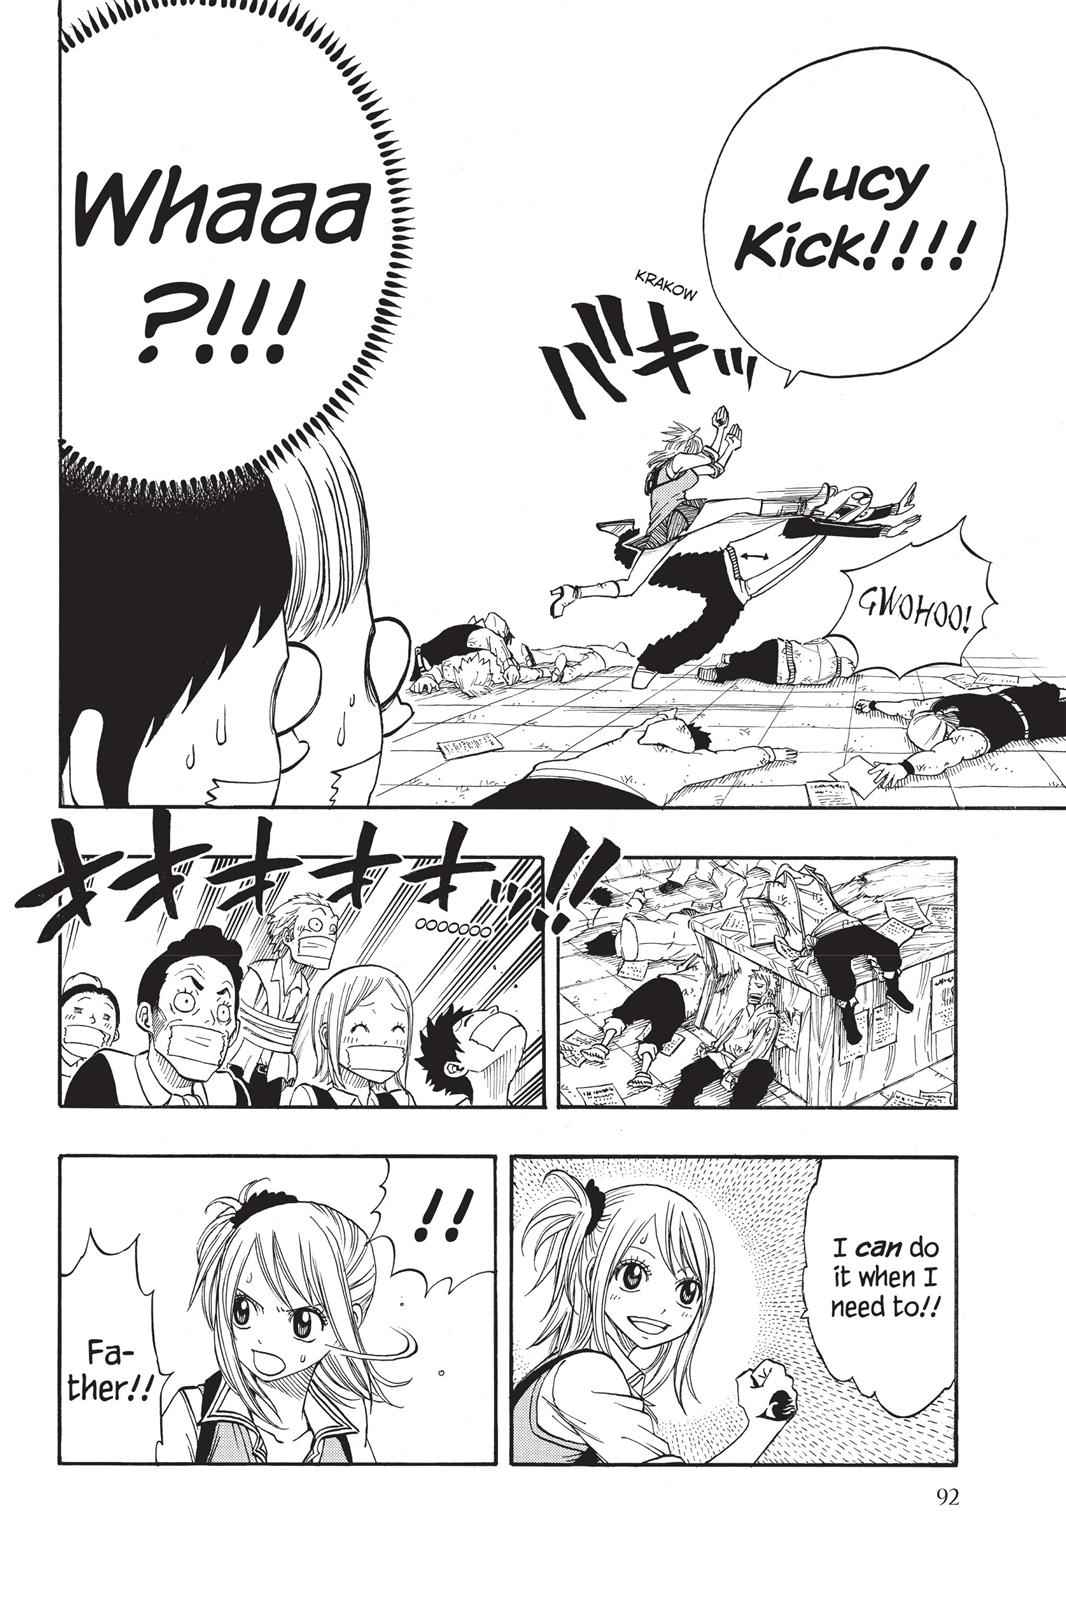  Chapter 130 image 008